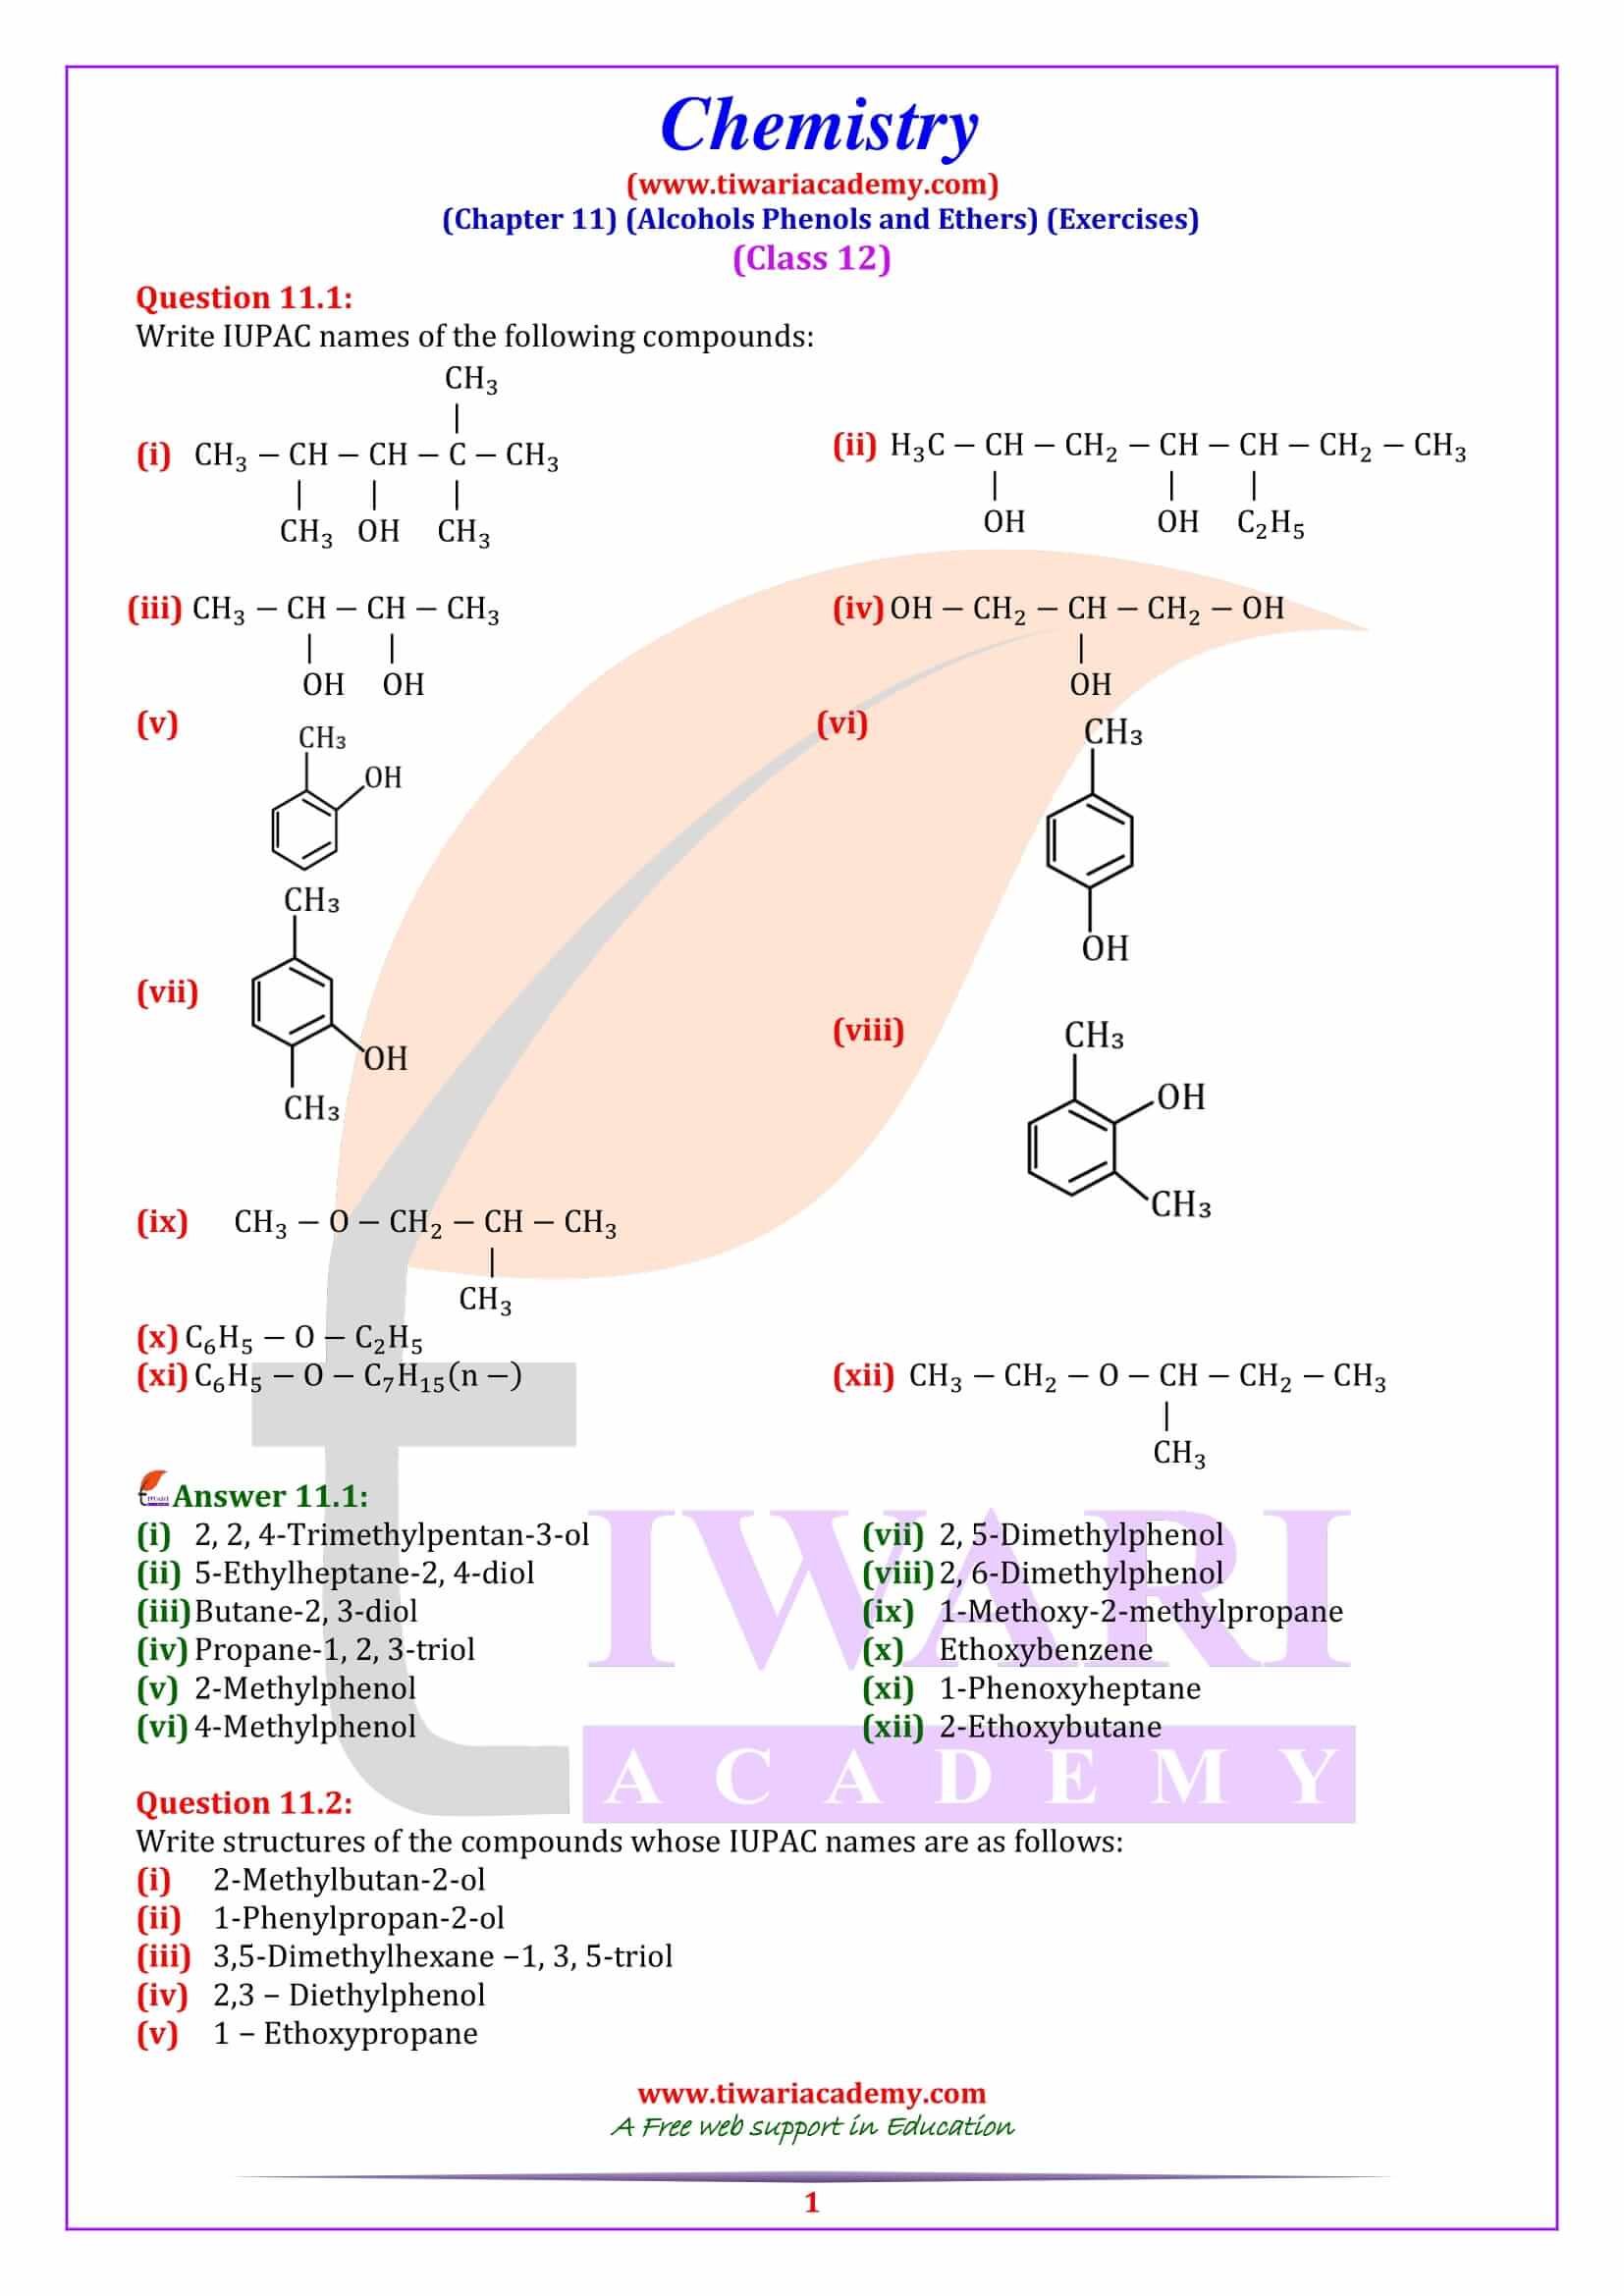 Class 12 Chemistry Chapter 11 Alcohols, Phenols and Ethers